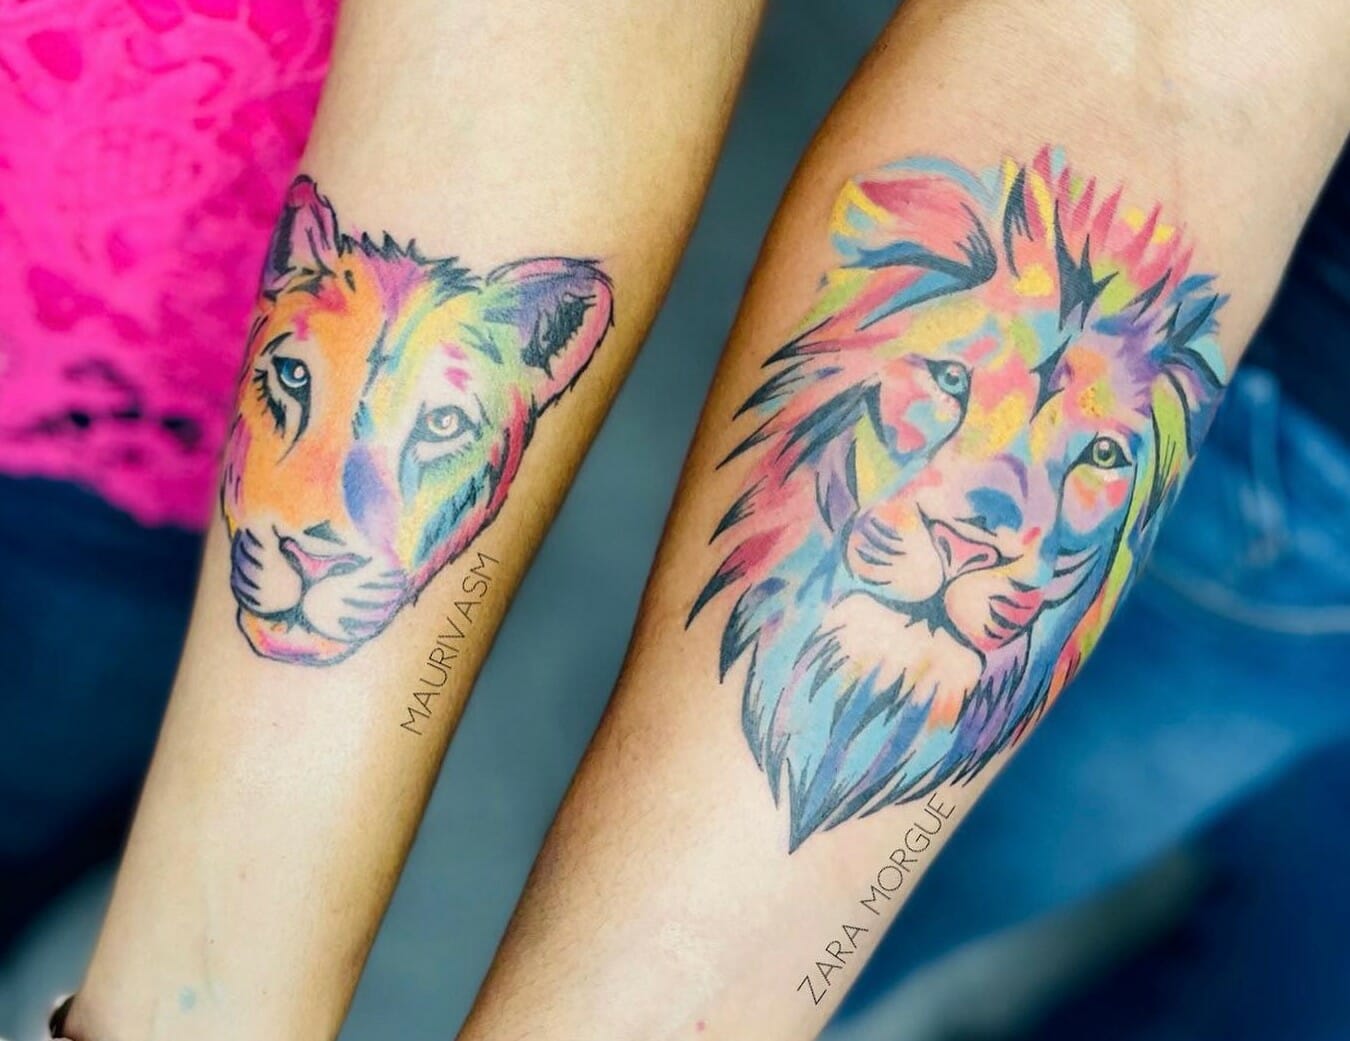 3. Small Girly Lion Tattoos - wide 8